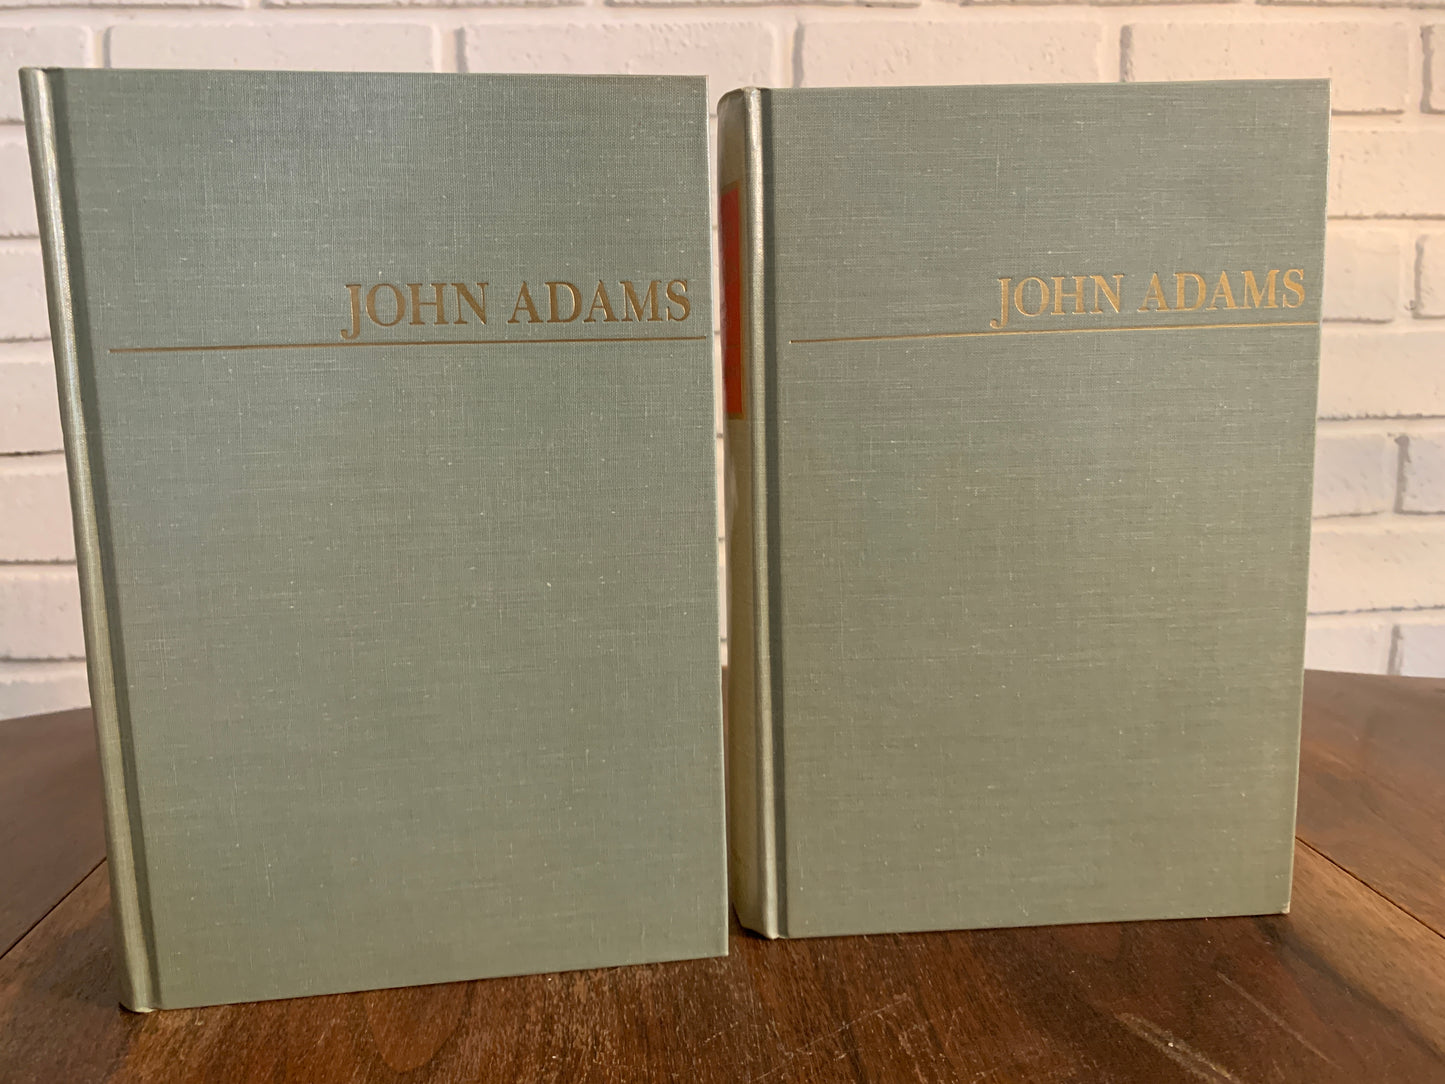 John Adams by Page Smith in 2 volumes 1962 Hardcover BOTMC